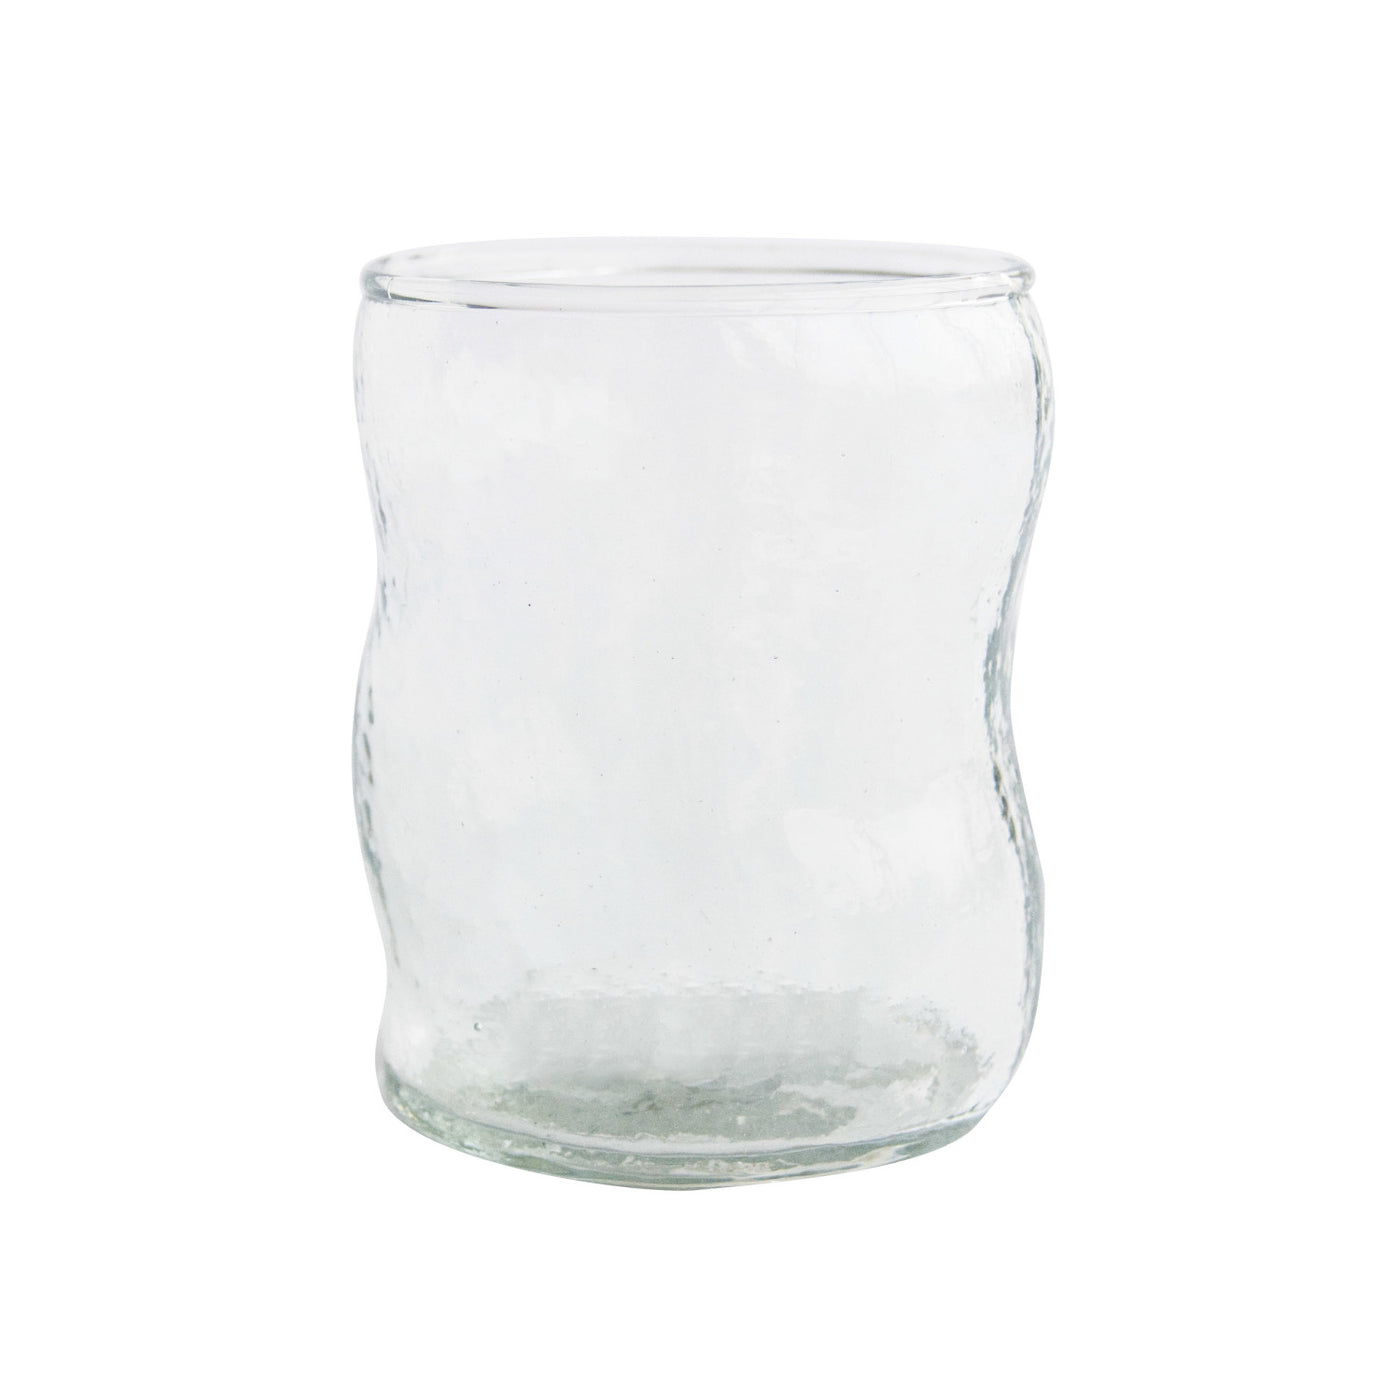 Recycled Organic Shaped Drinking Glass